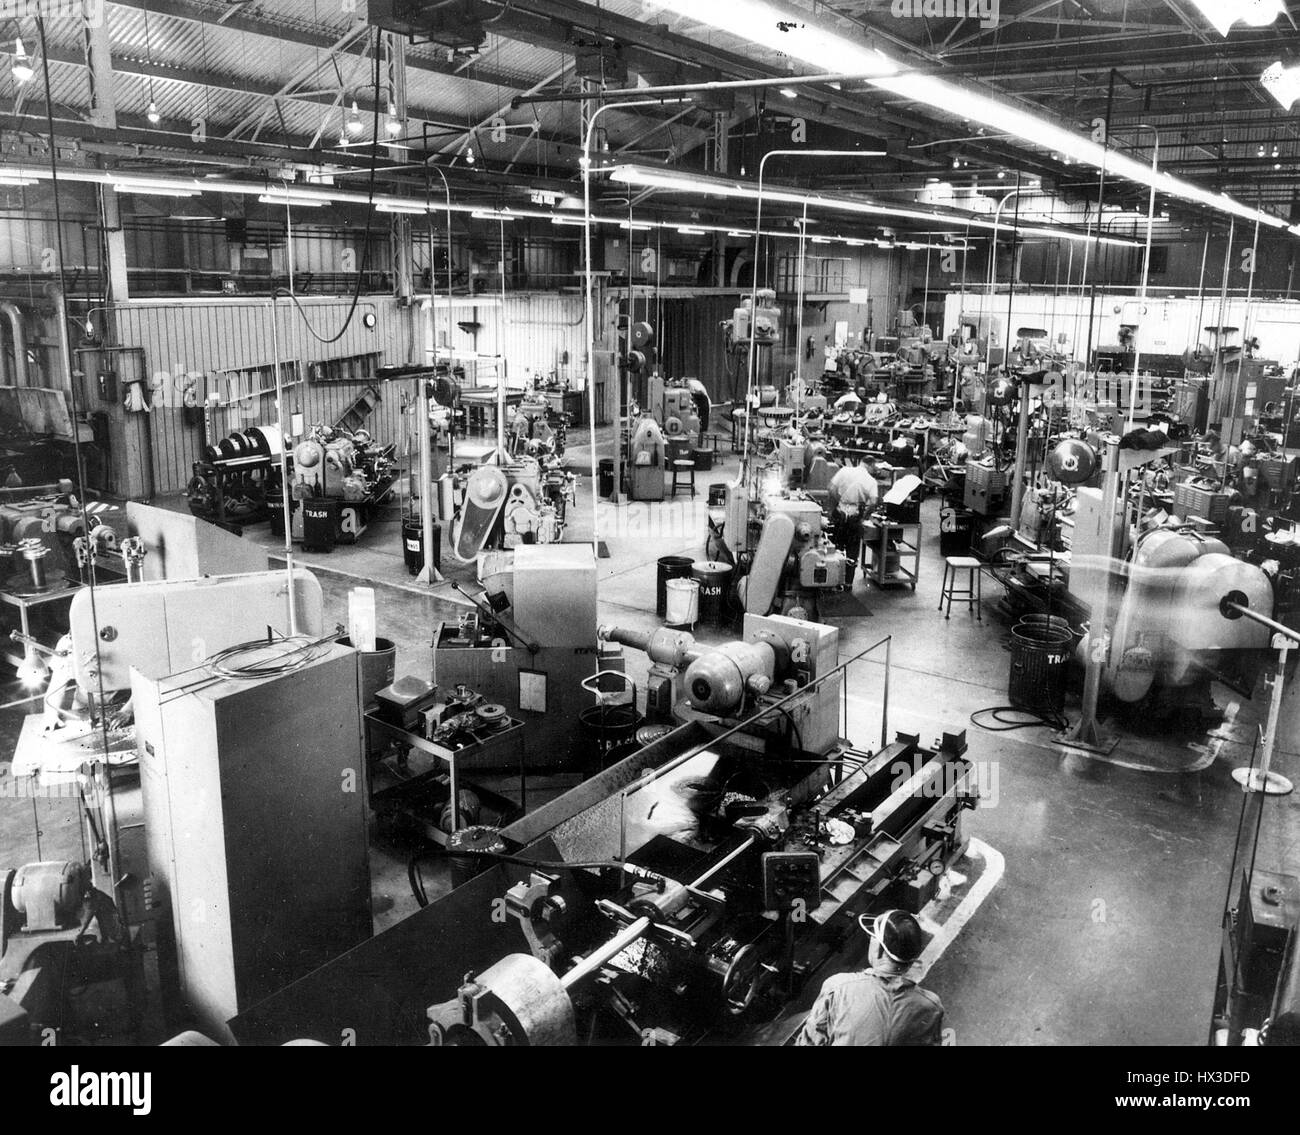 Much of the intricate scientific and technical equipment needed to implement Battelle-Northwest's extensive research and development program is fabricated in this specially-equipped machine shop at Pacific Northwest Laboratory, Richland, Washington, 1966. Image courtesy US Department of Energy. Stock Photo